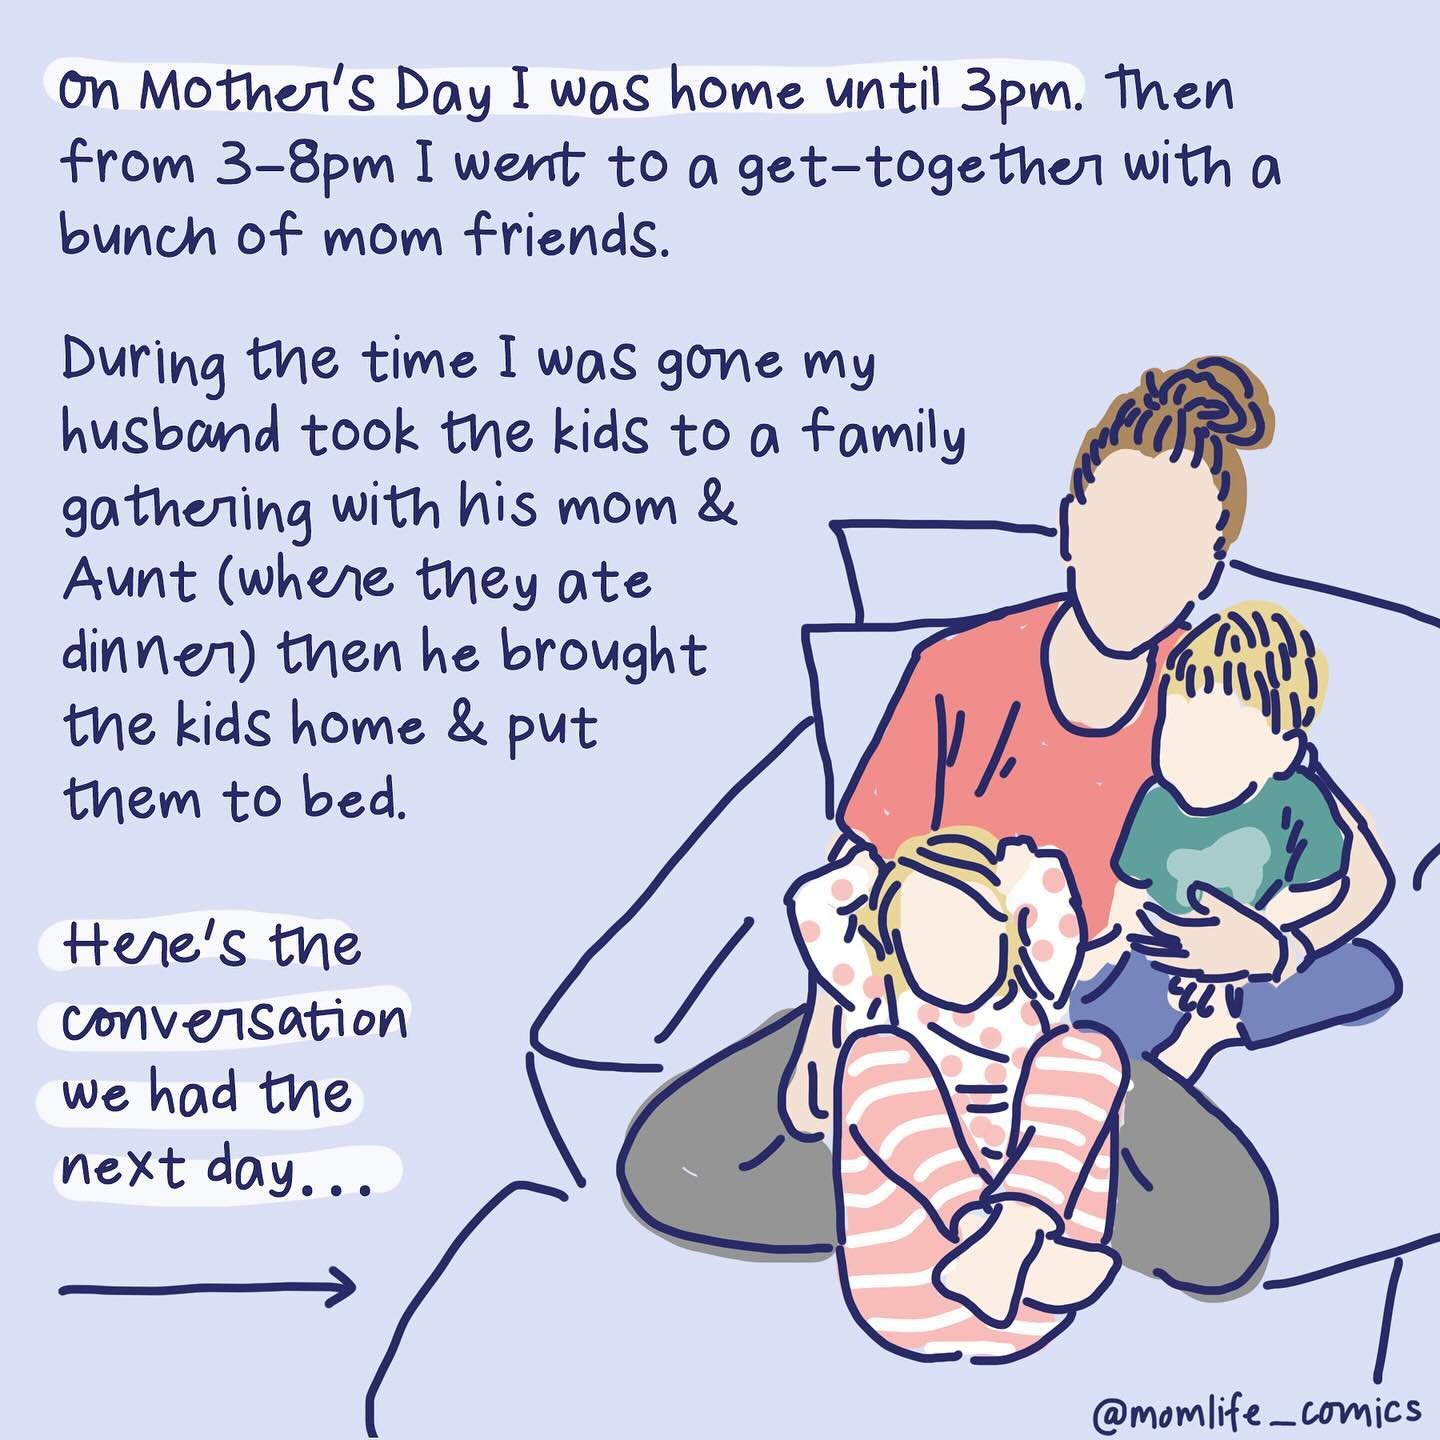 It&rsquo;s time for my annual retelling of this classic Mother&rsquo;s Day story (that I made back in 2022). Never gets old&hellip;🐉 

But good news! A LOT has changed in the past 2 years + Ben definitely wouldn&rsquo;t feel this way (OR say this!) 